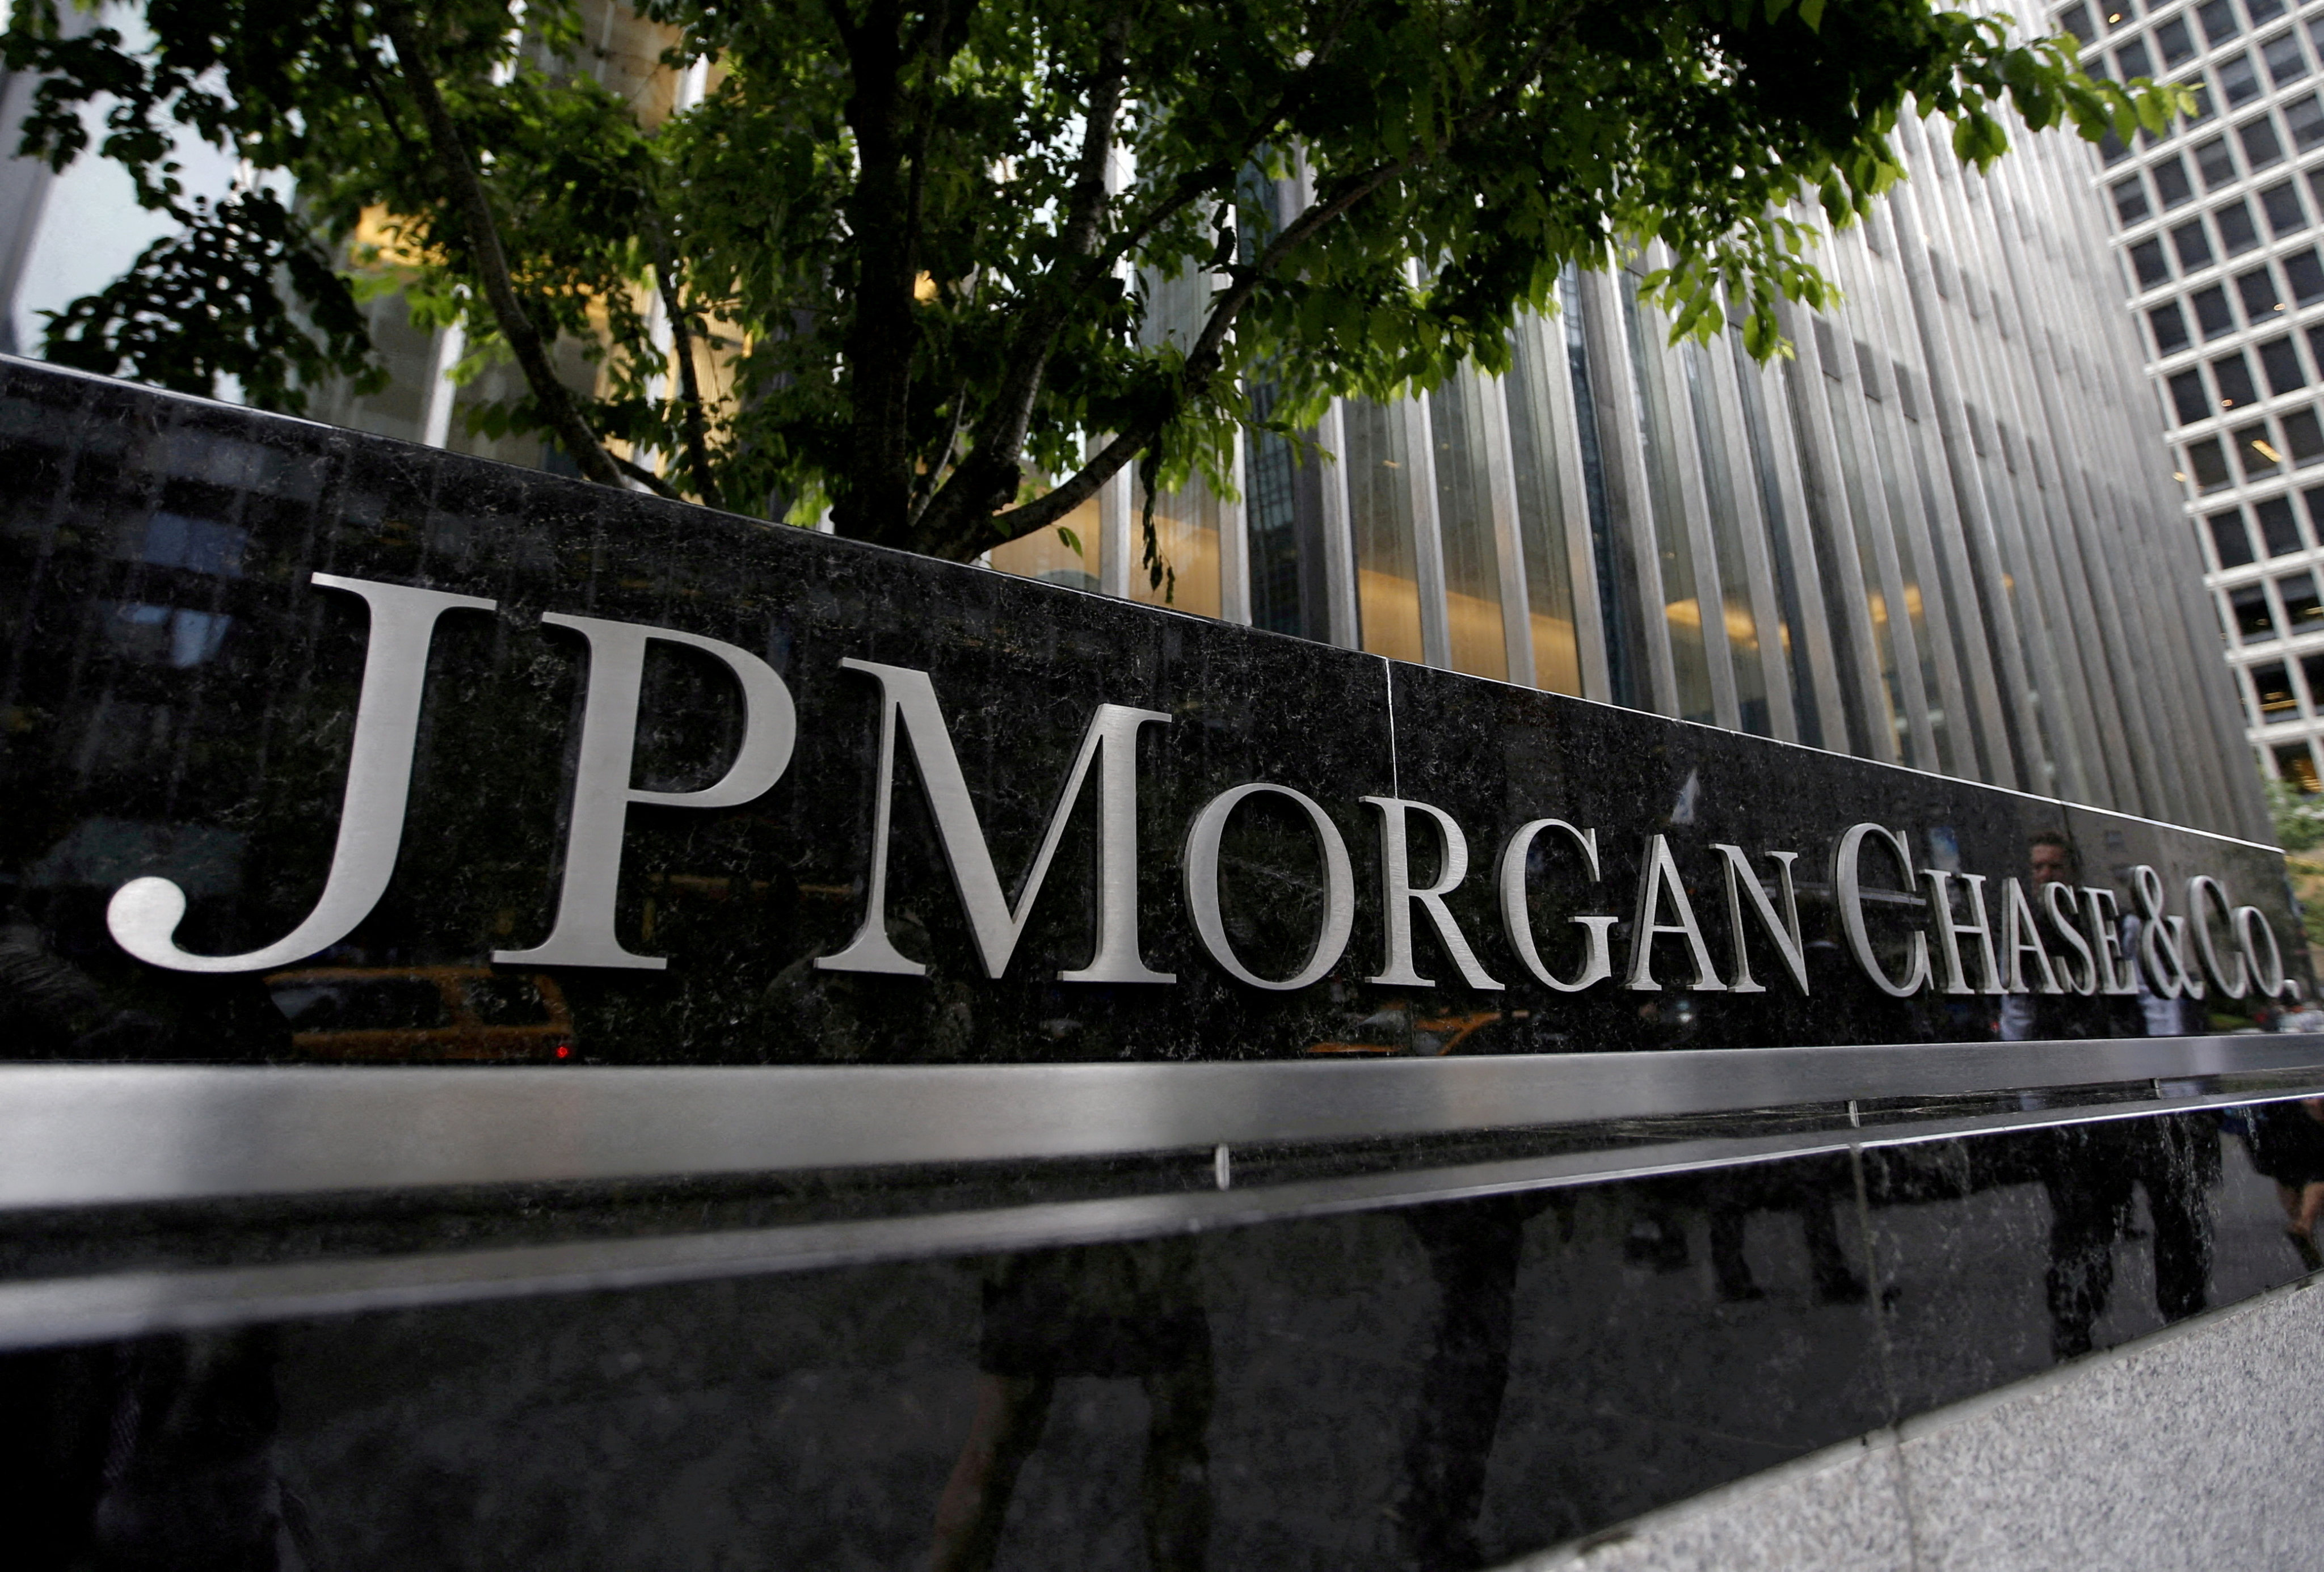 JPMorgan Chase’s corporate headquarters in New York. Photo: Reuters